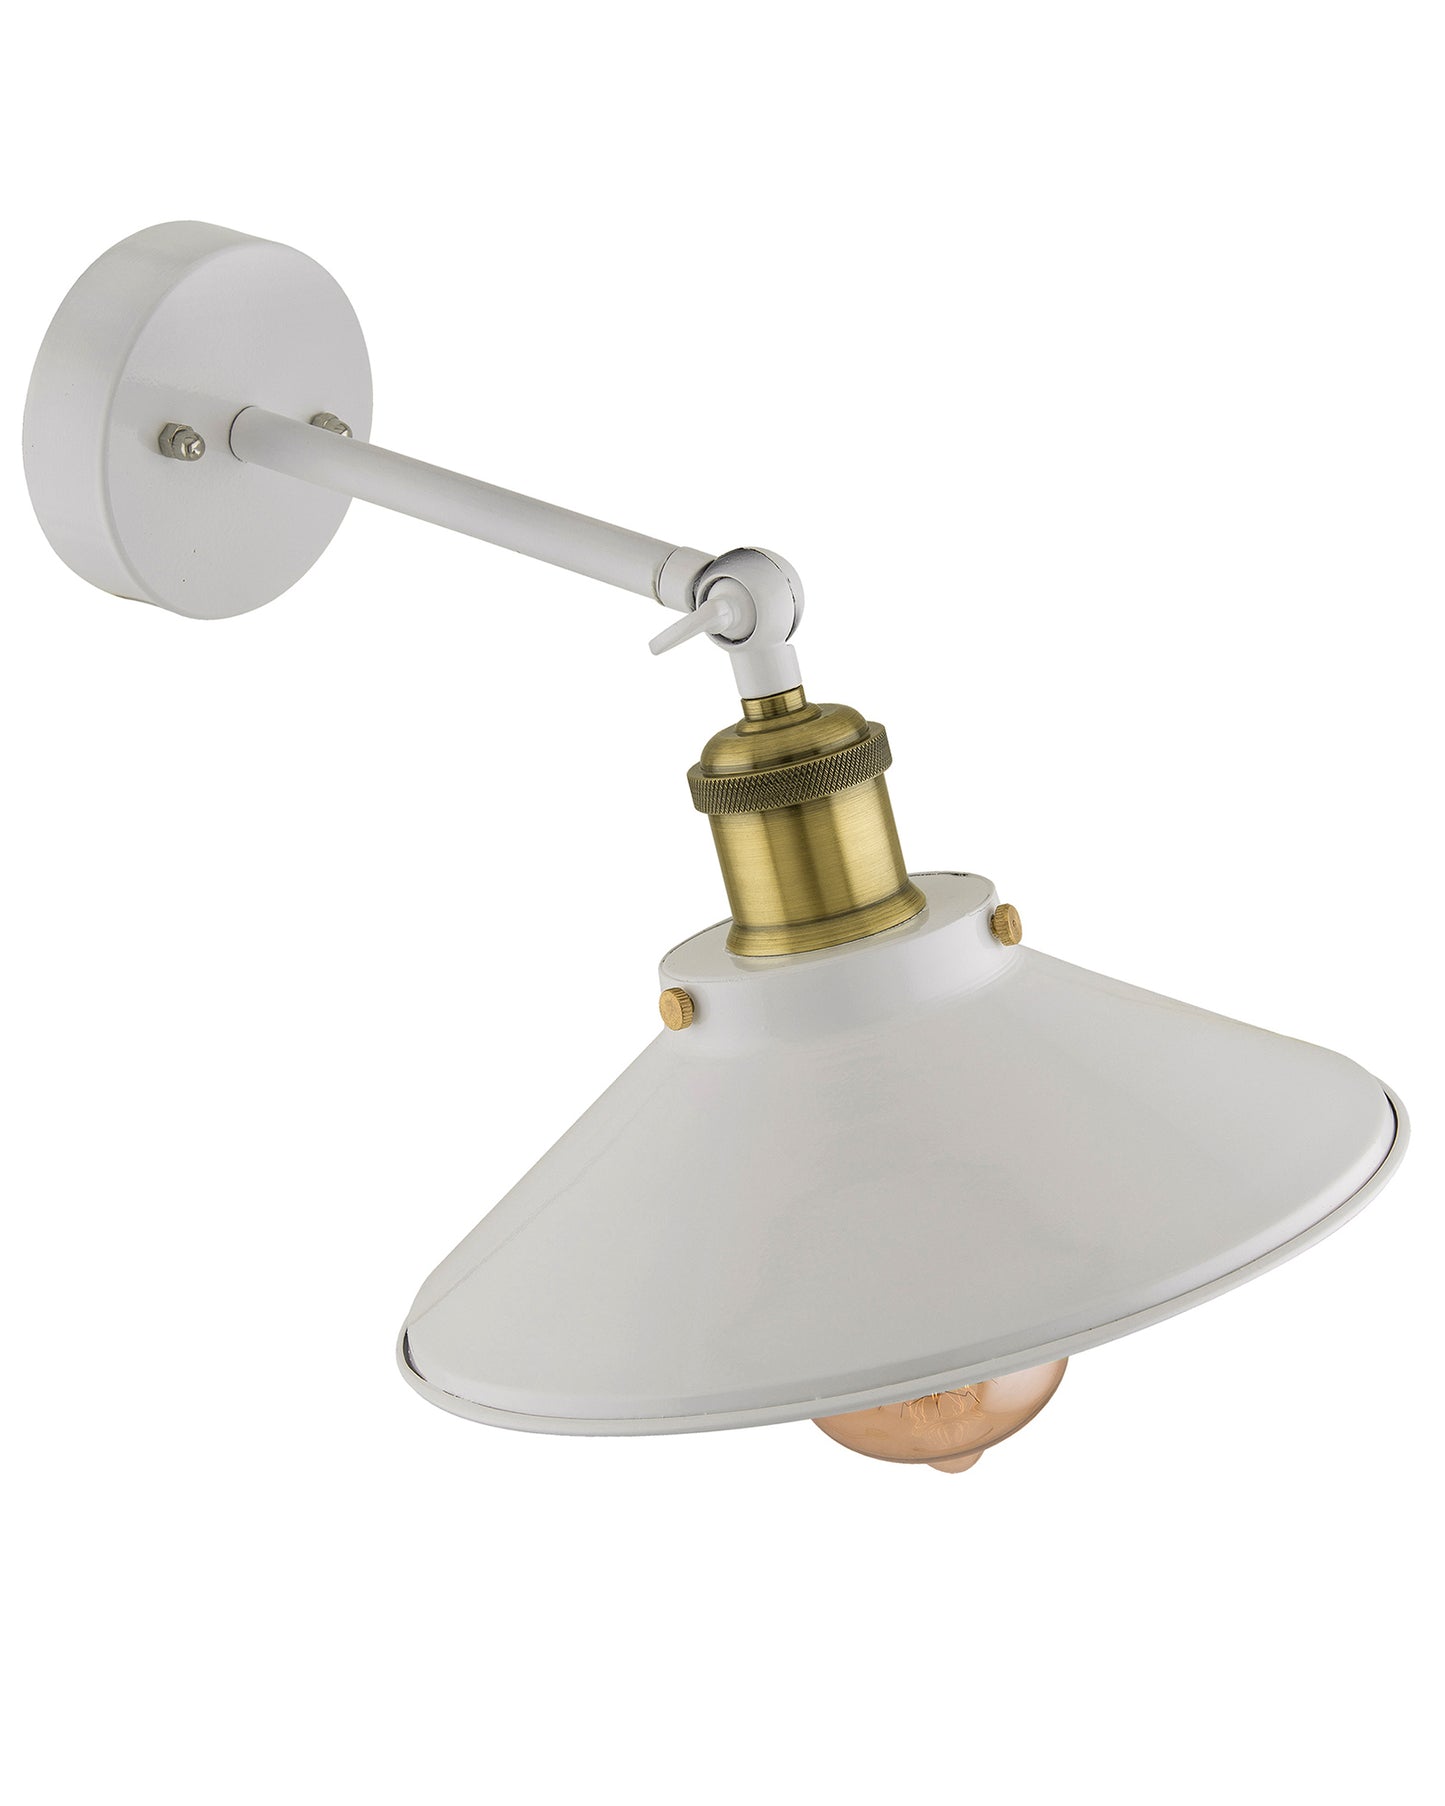 Edison White Cone Shade Wall Lamp, Antique Gold Vintage Industrial Loft, E27 Holder, Decorative, Swing Wall Light